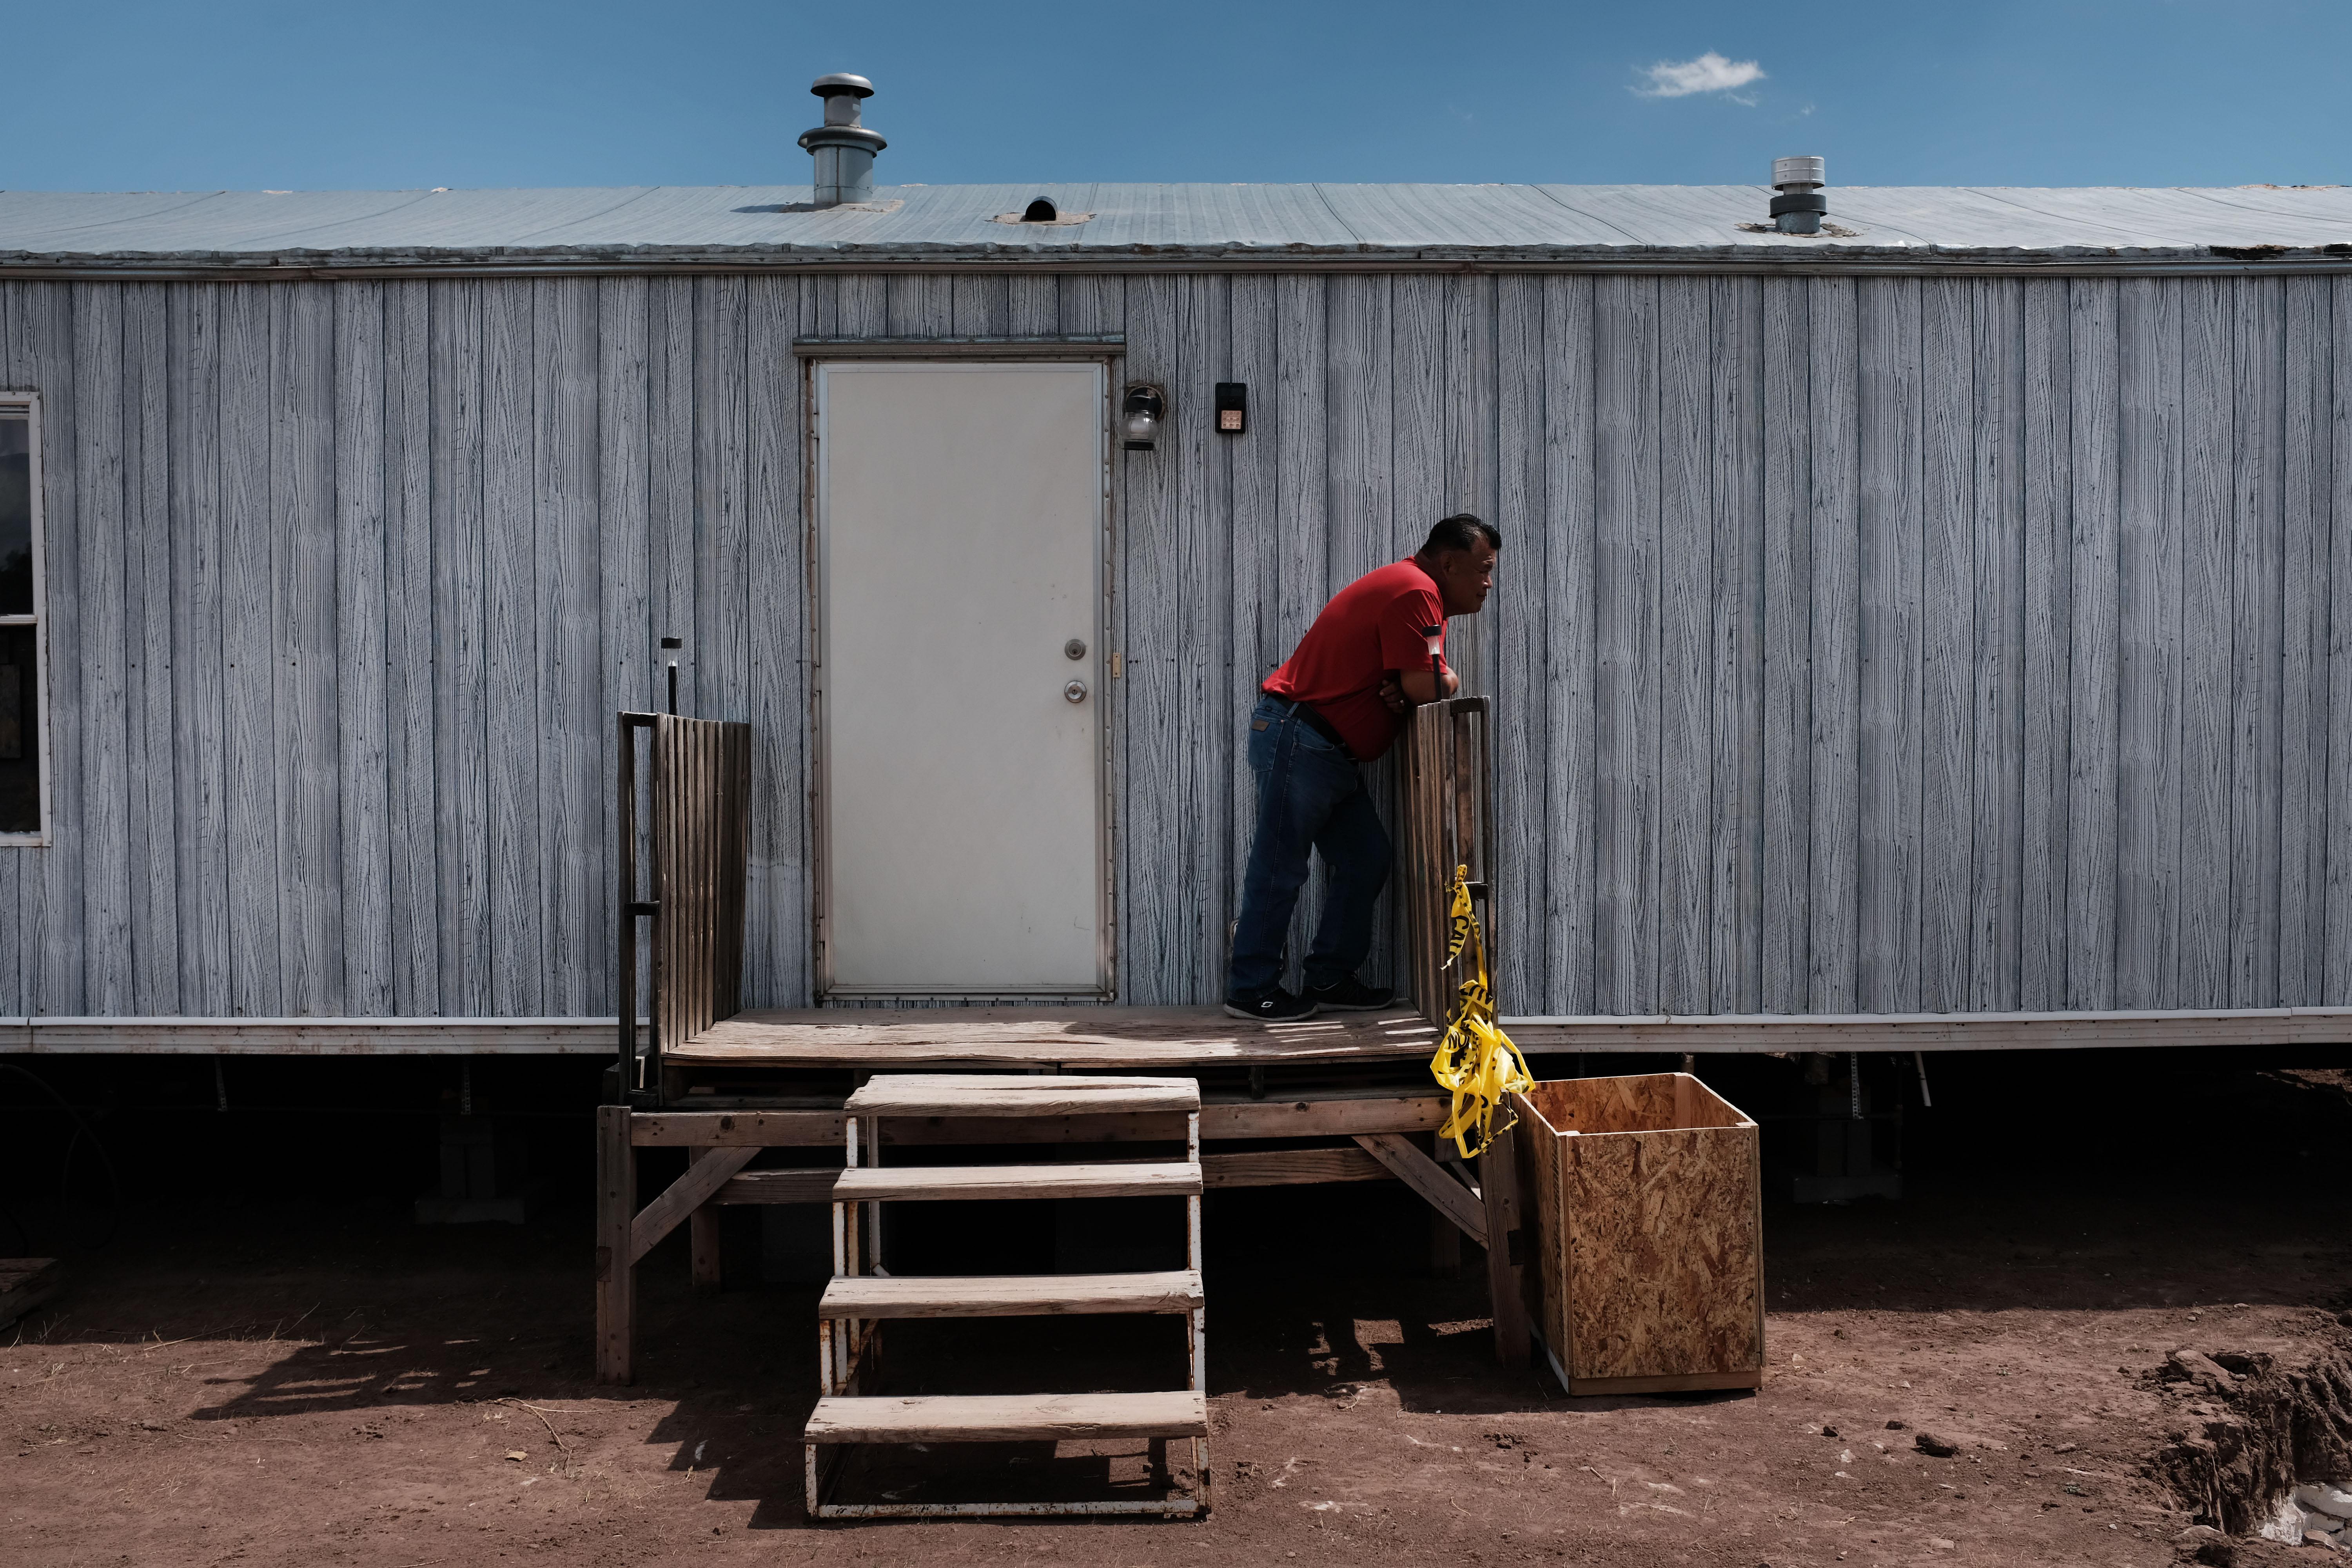 A man leans on a wooden platform by the door of a mobile home.